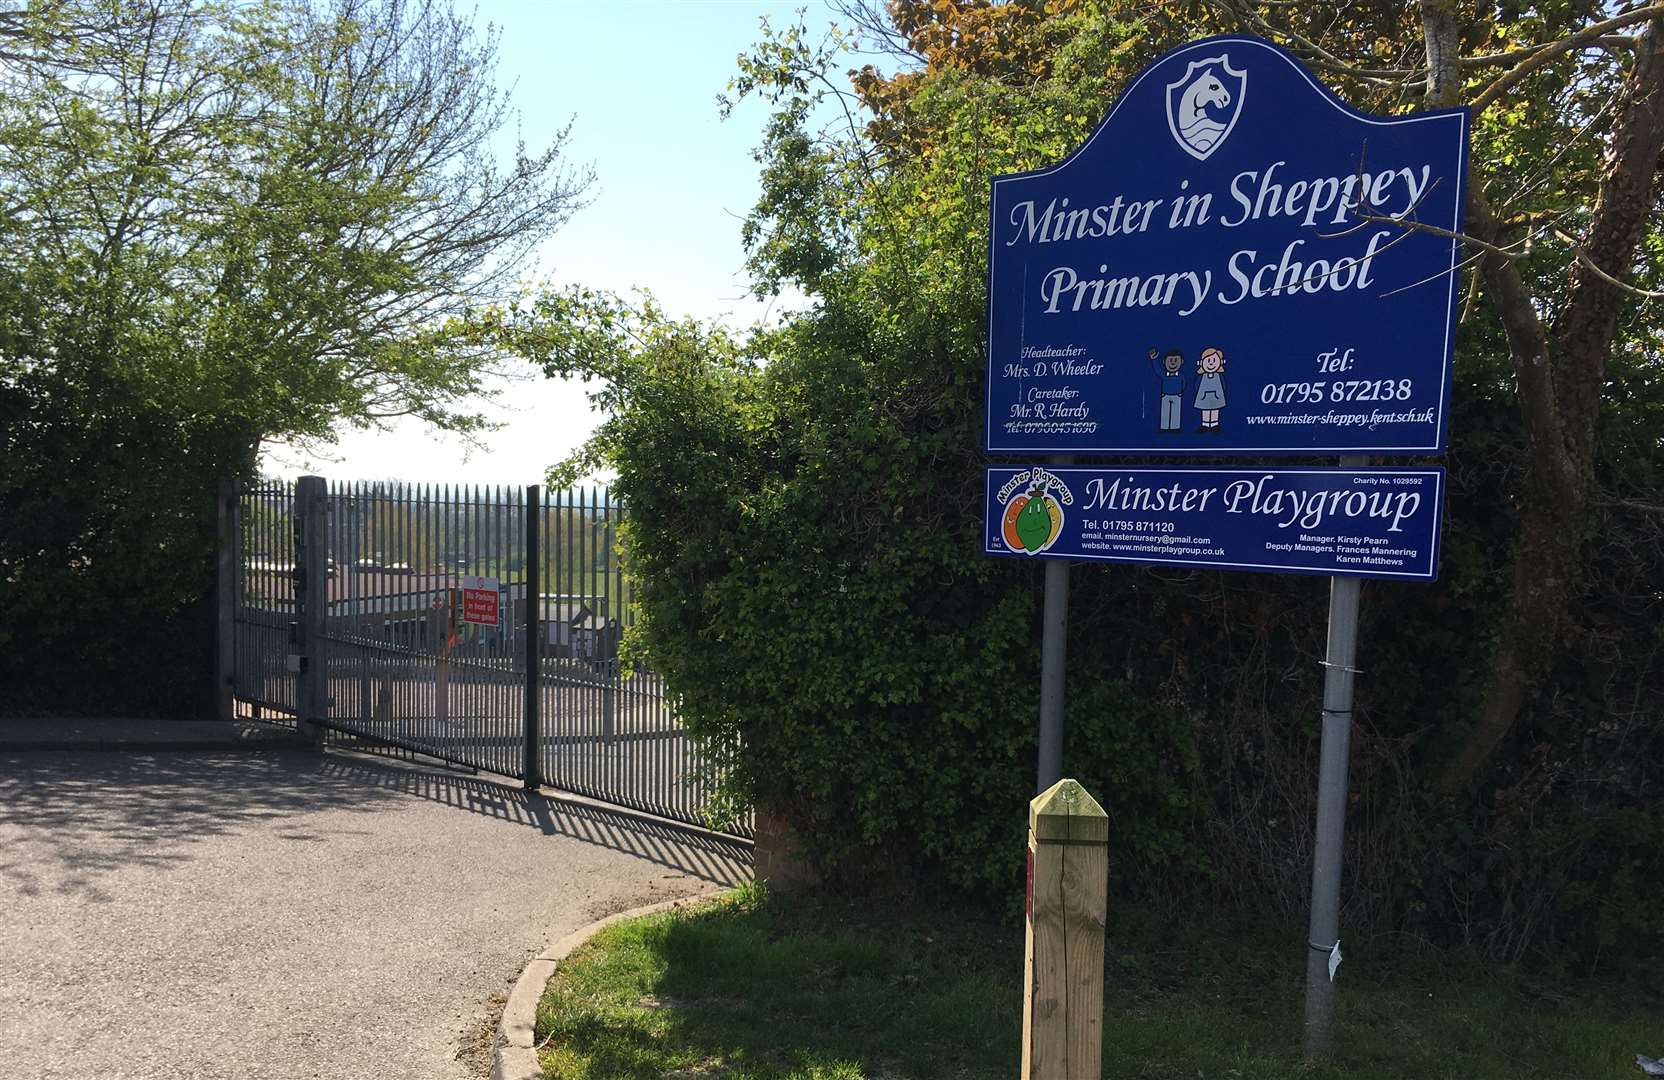 Minster Primary School in Brecon Chase, Sheppey